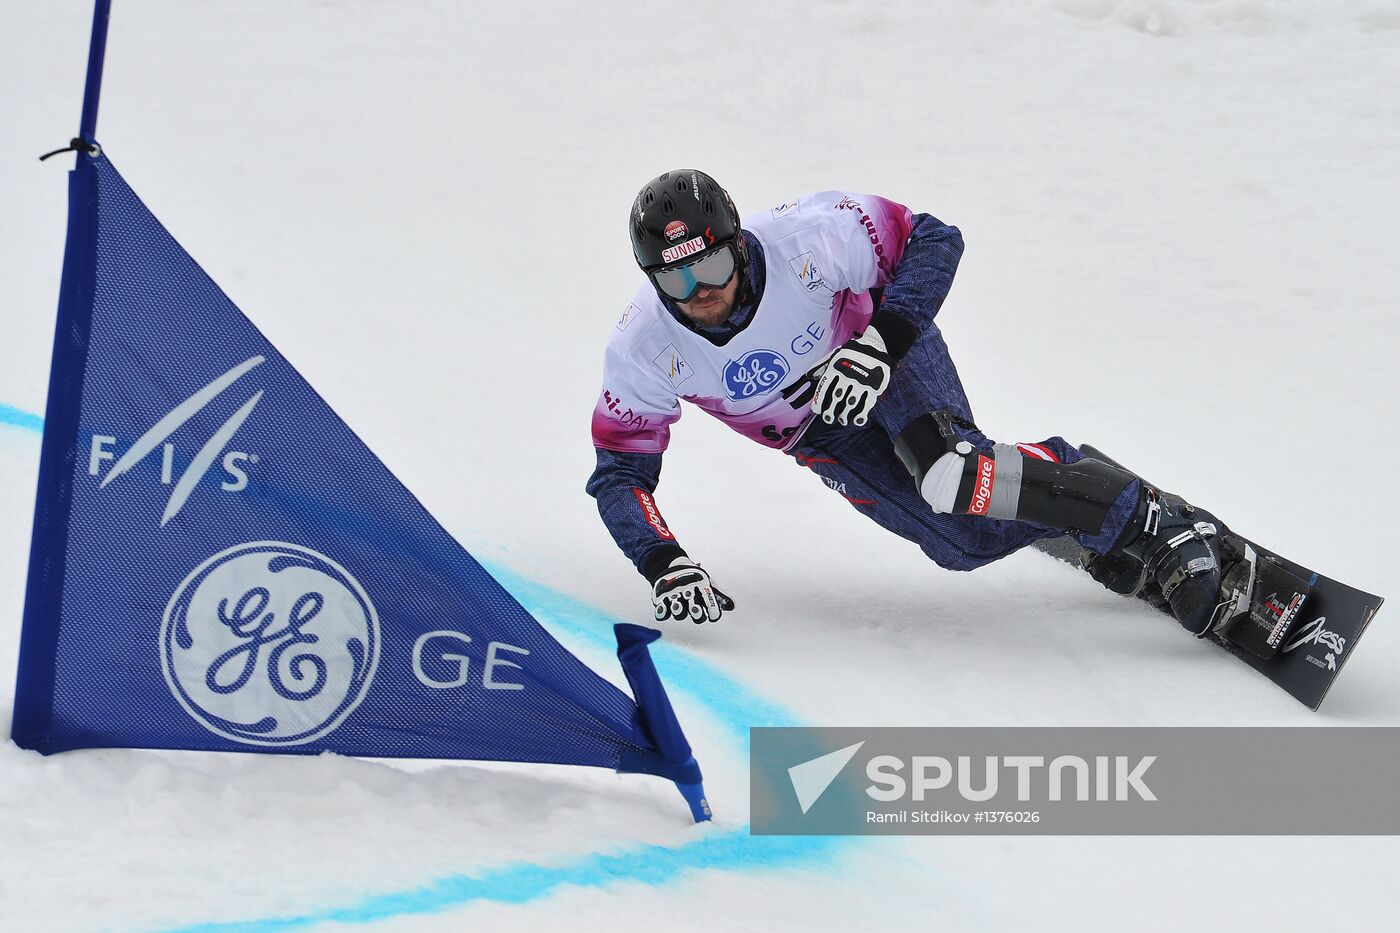 FIS Snowboard World Cup. Parallel Giant Slalom